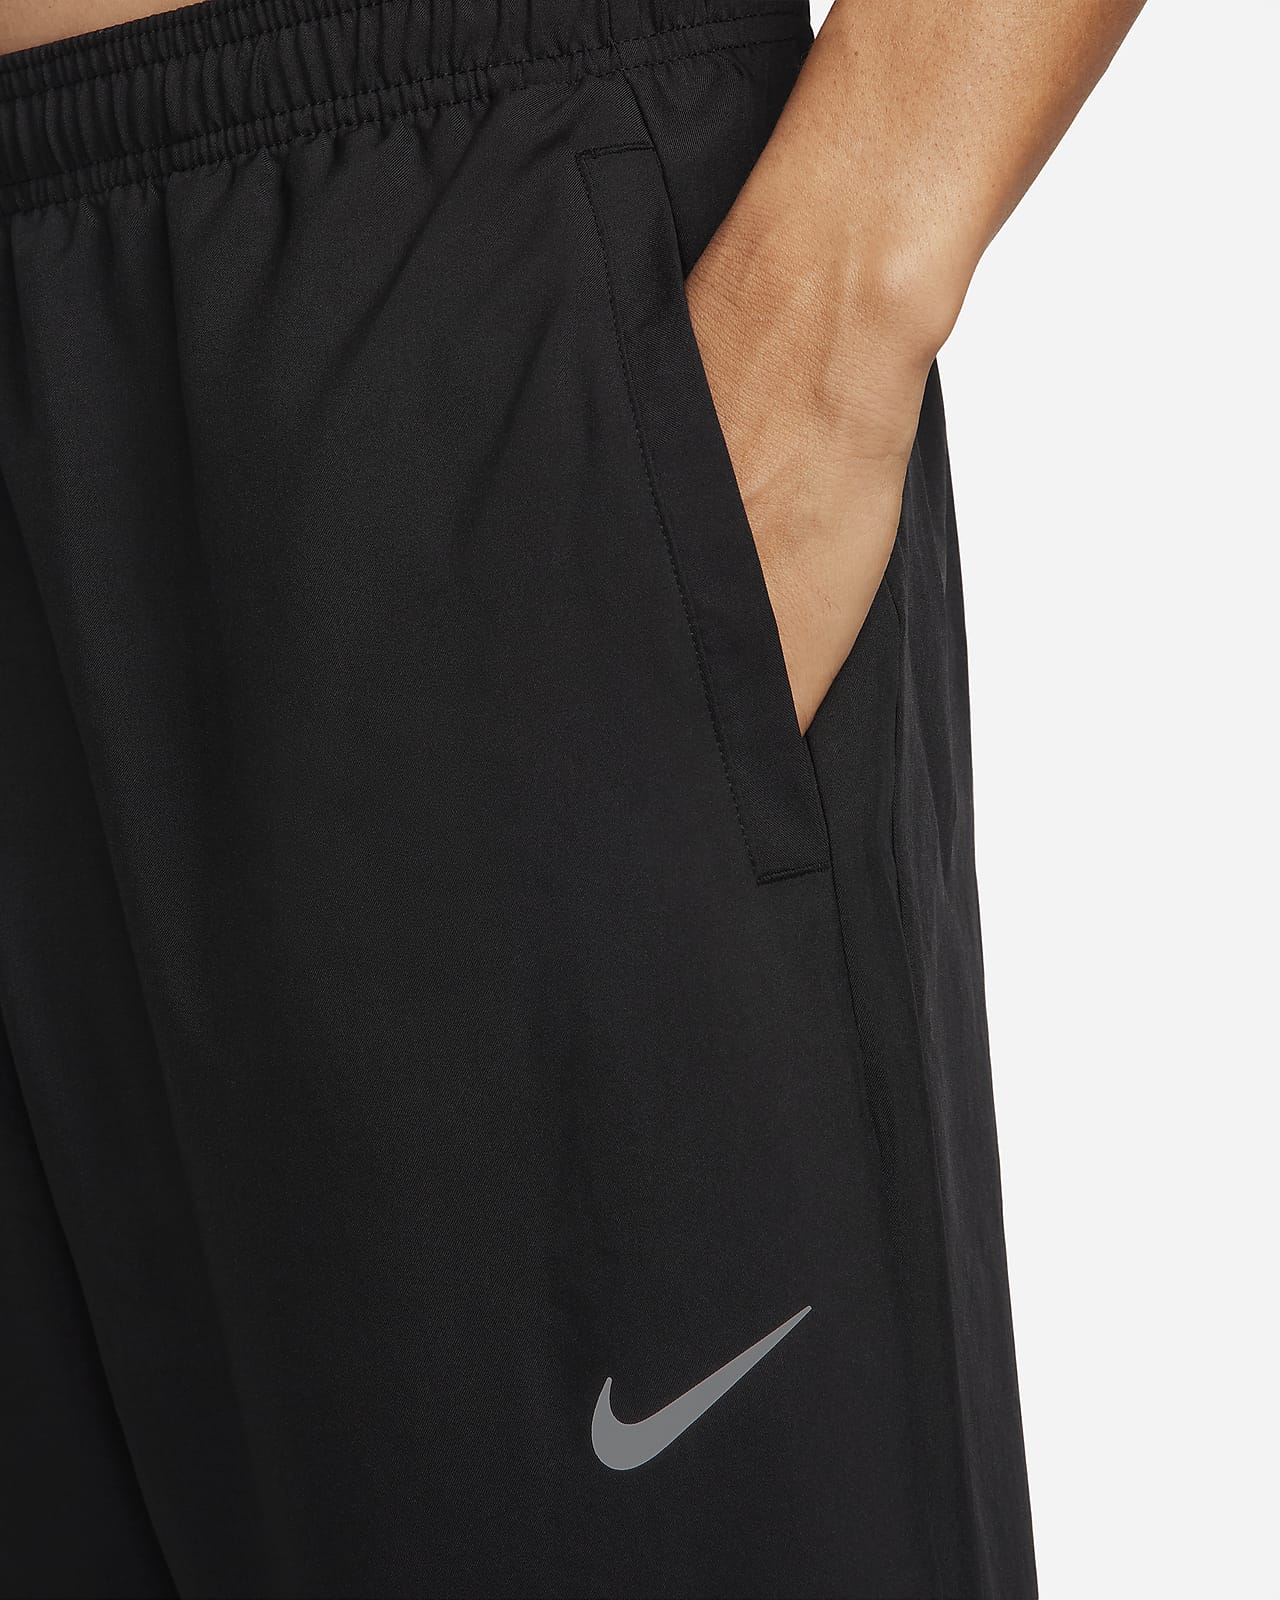 Nike Men Dri-Fit Challenger Woven Pants in Fad.Spruce,Different  Sizes,DD4894-309